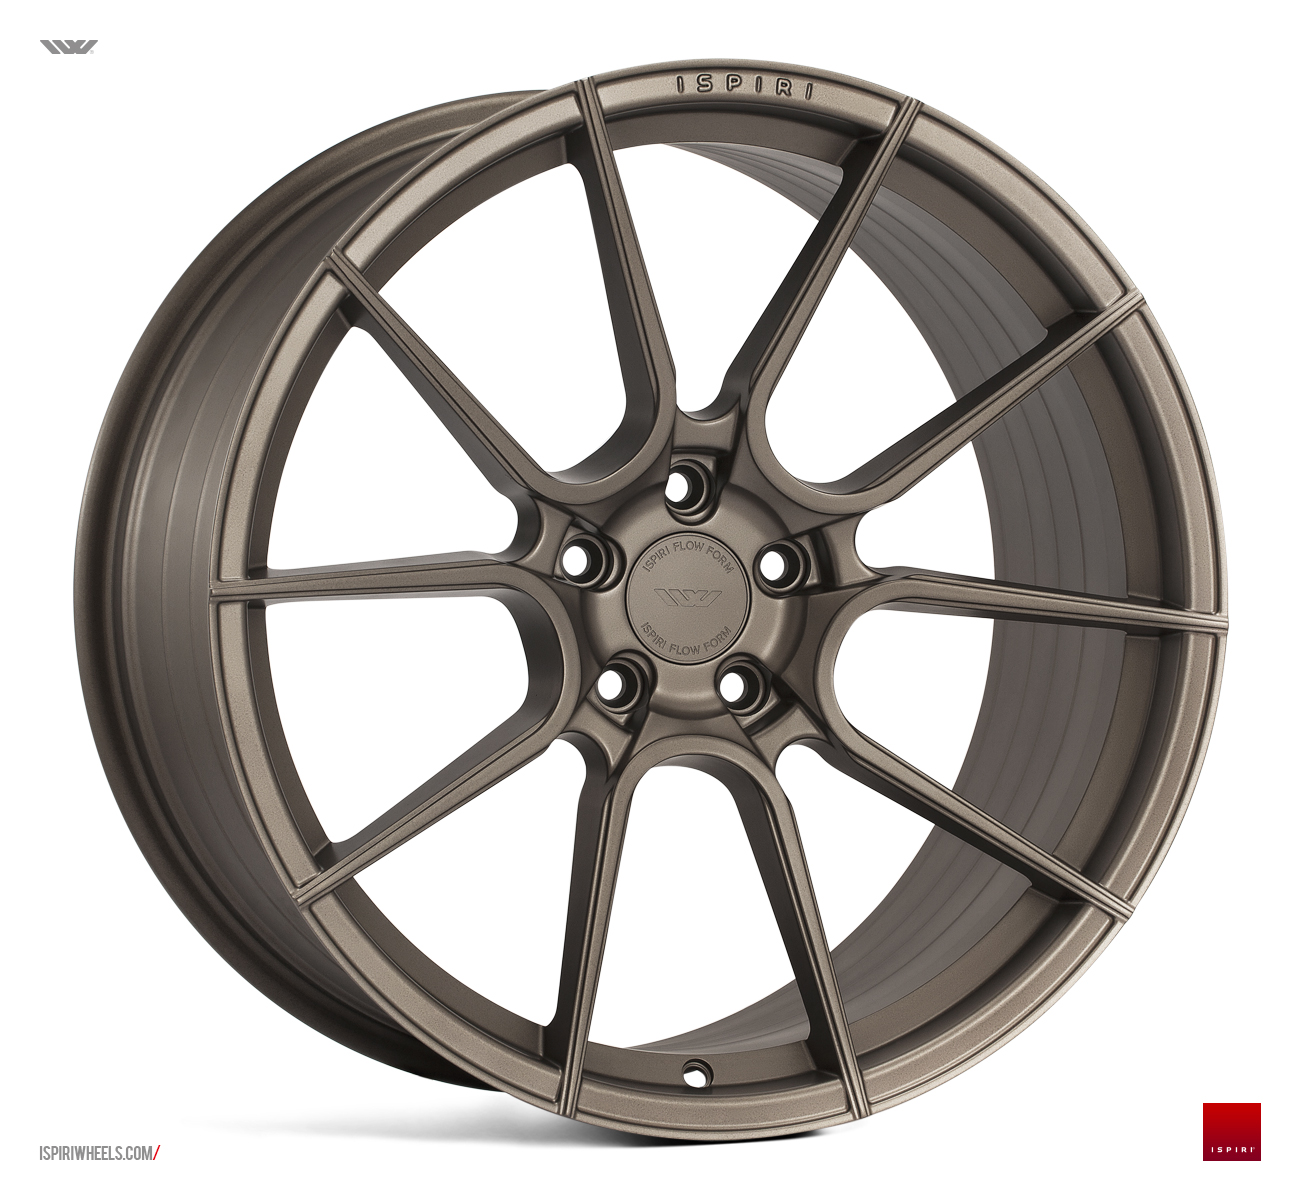 NEW 20" ISPIRI FFR6 TWIN 5 SPOKE ALLOY WHEELS IN MATT CARBON BRONZE, VARIOUS FITMENTS AVAILABLE